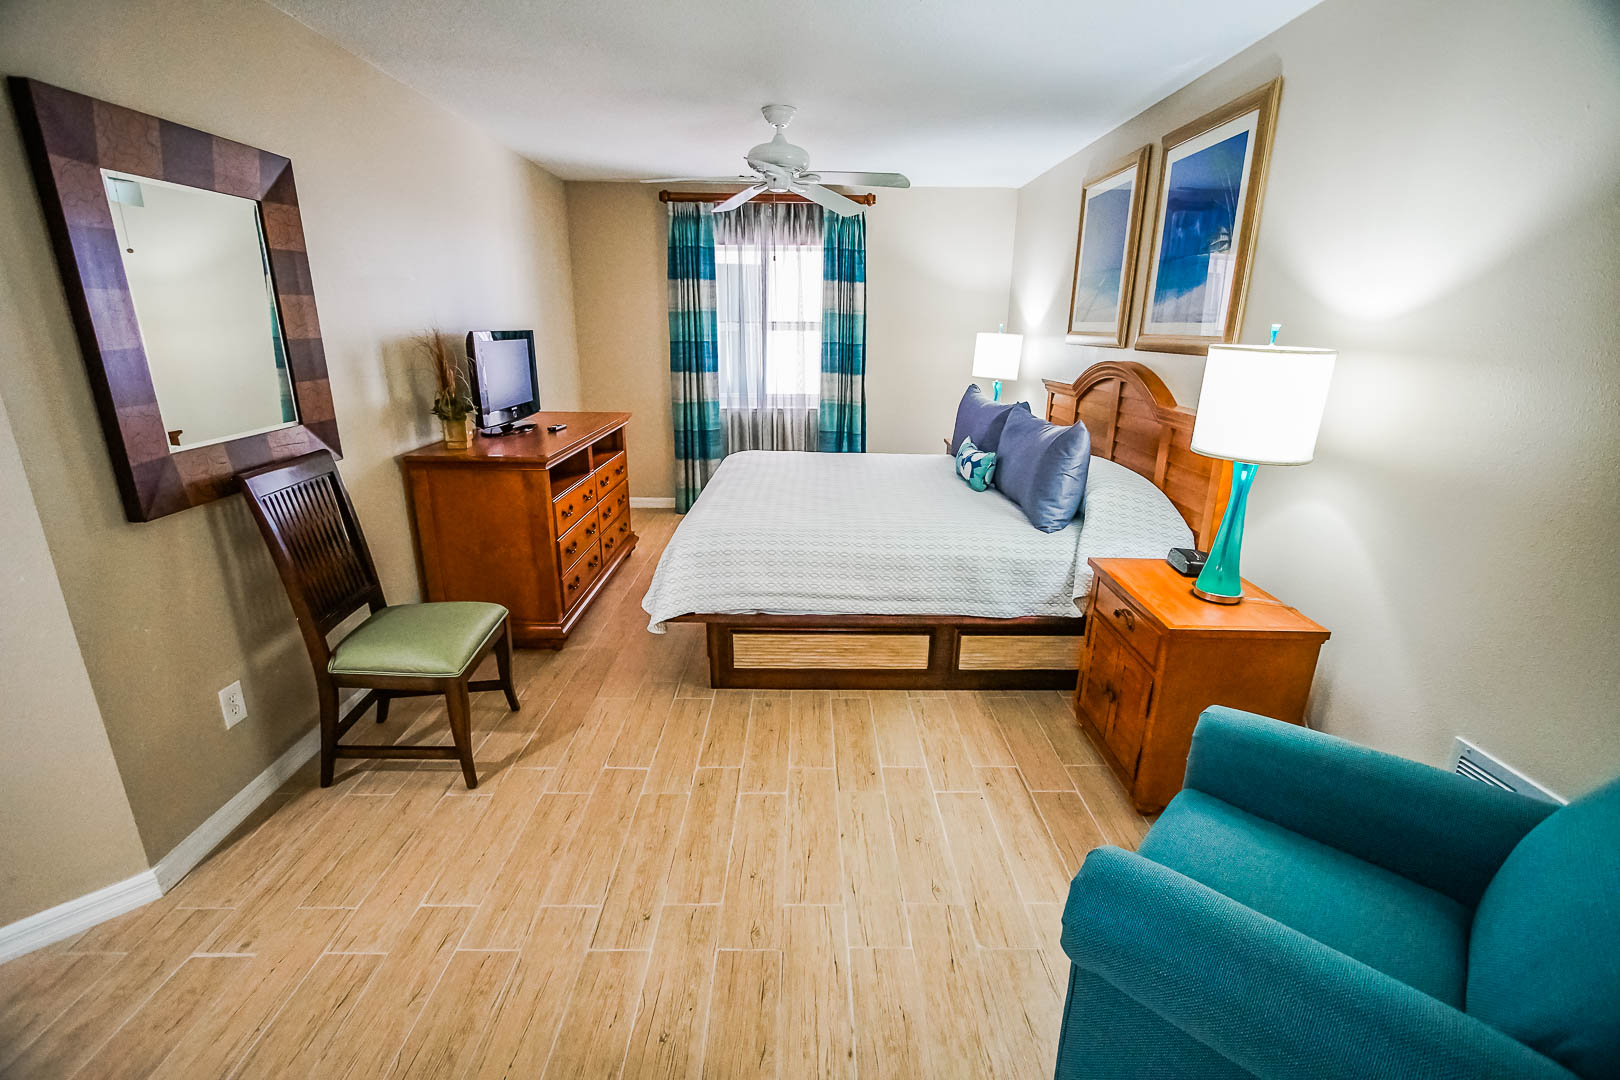 A pleasant 1 bedroom unit at VRI's The Resort on Cocoa Beach in Florida.